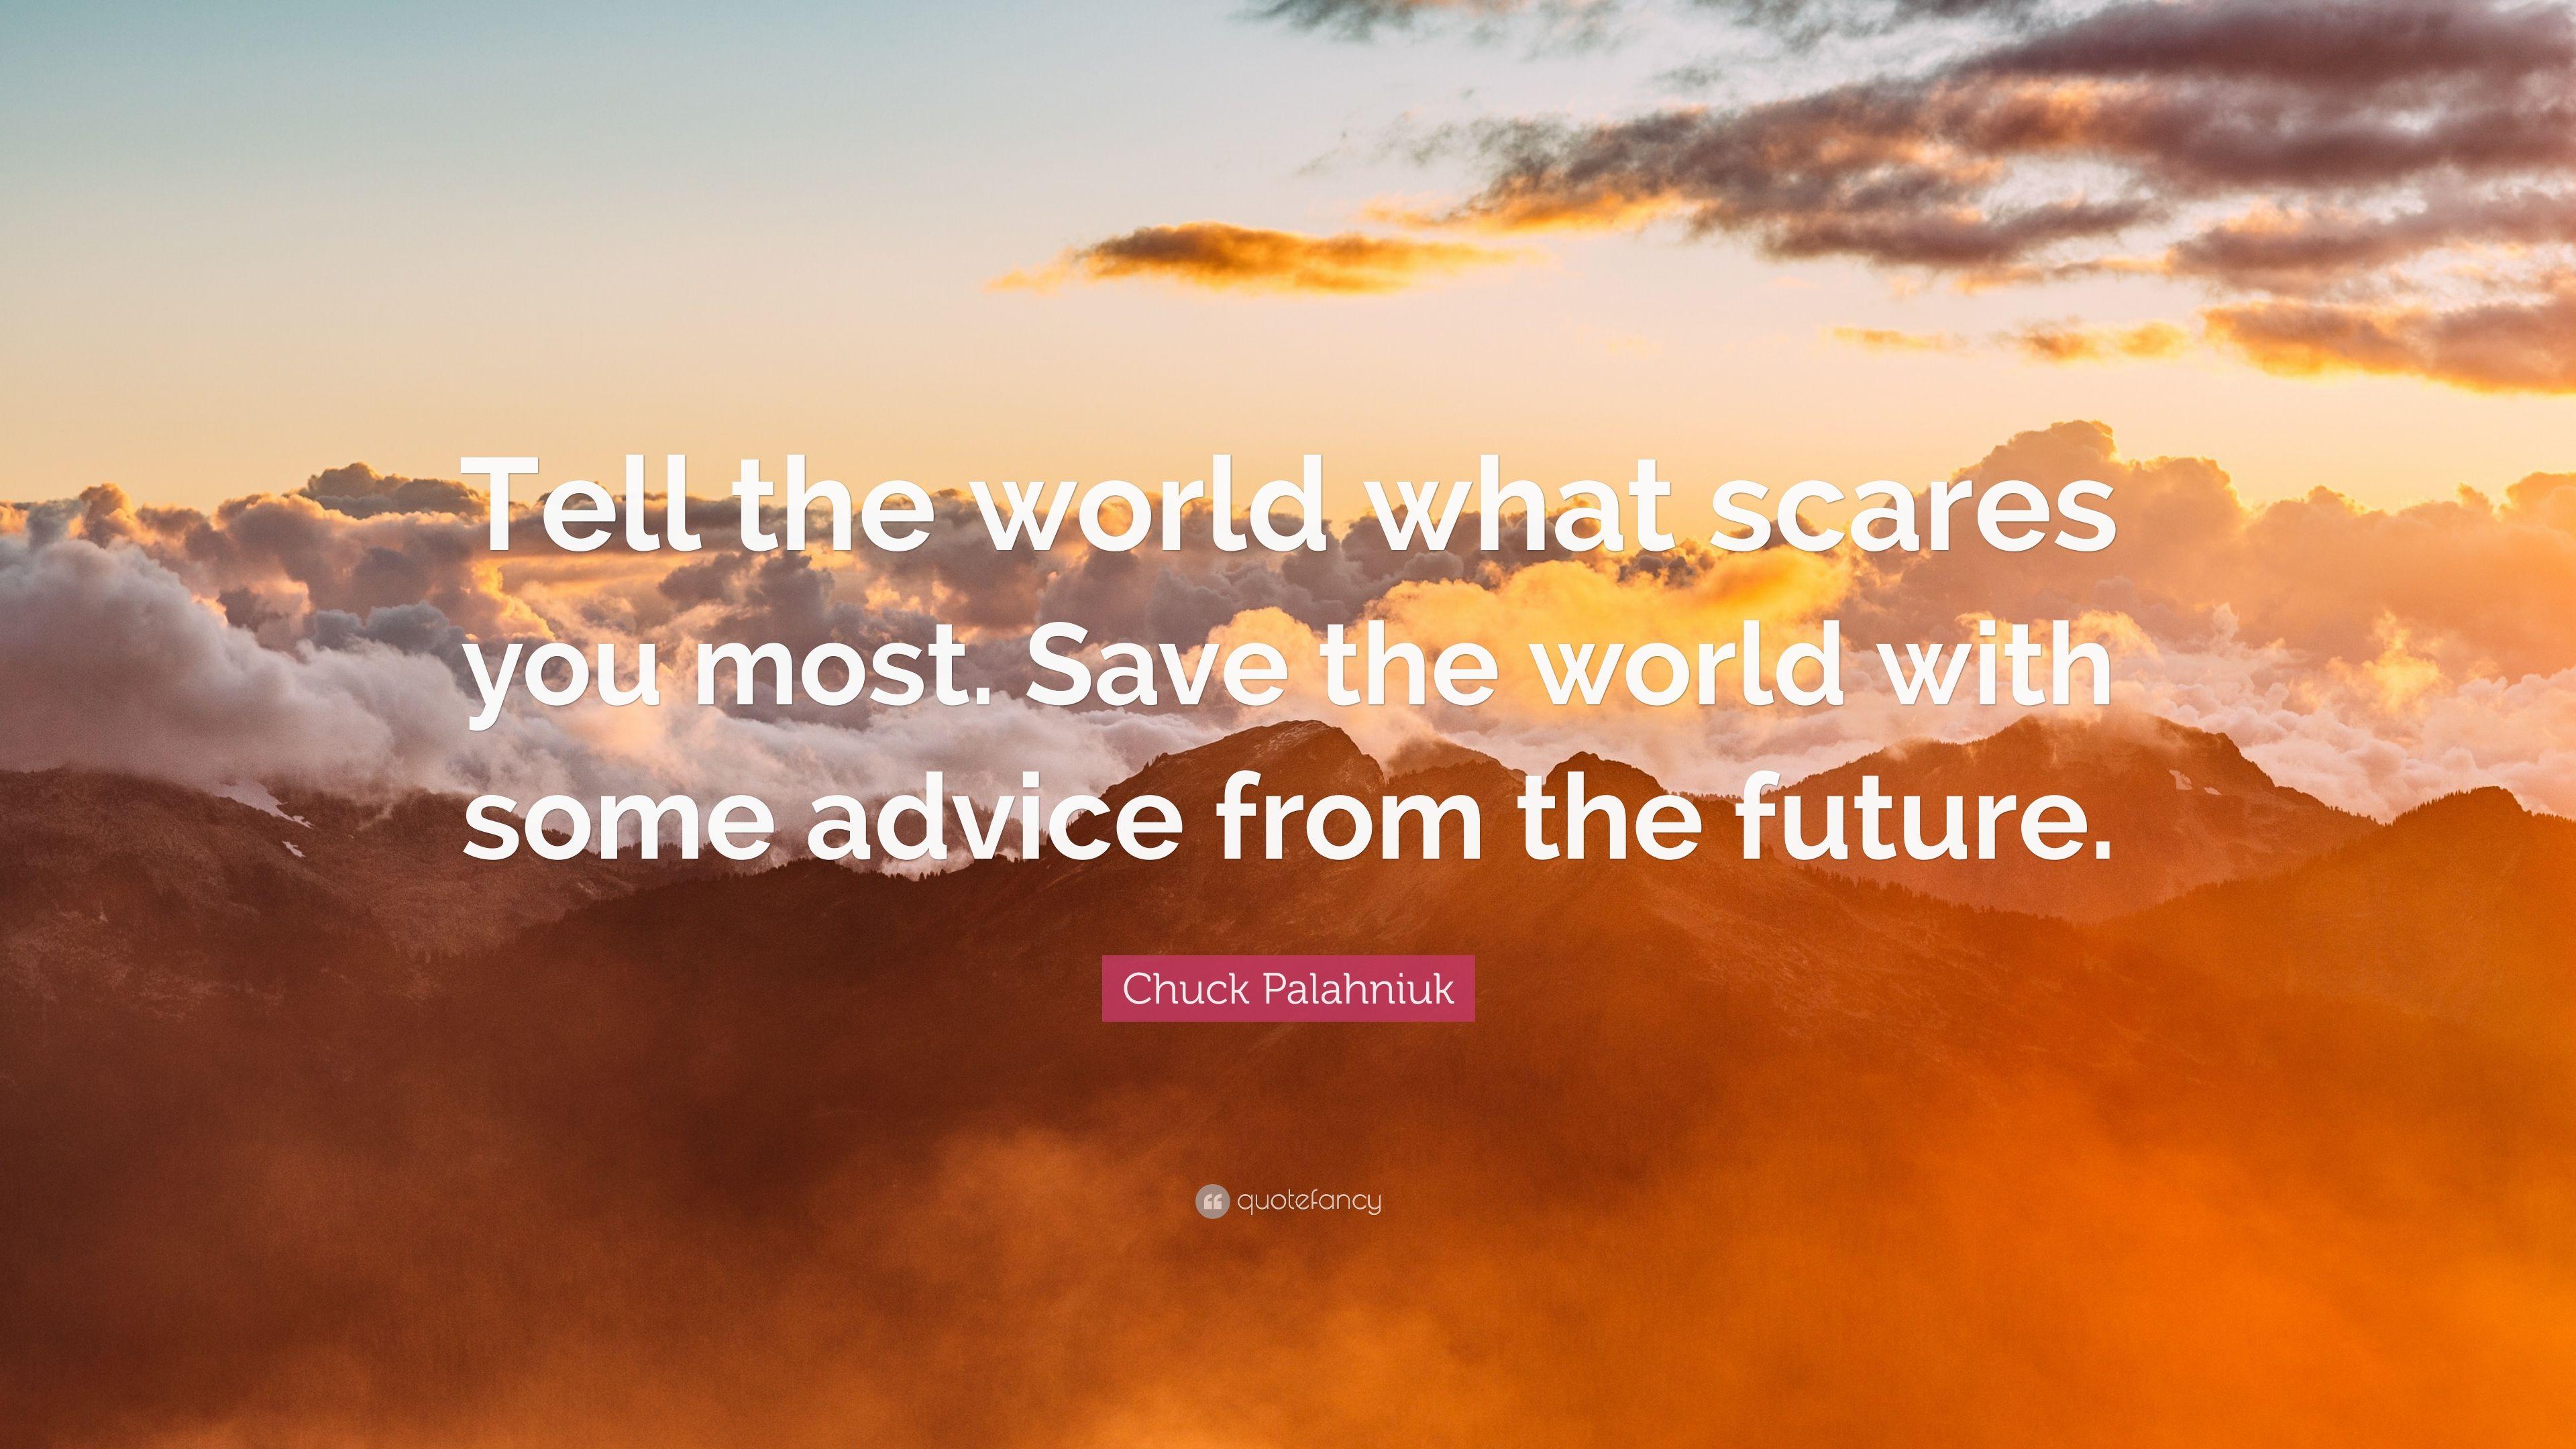 Chuck Palahniuk Quote: “Tell the world what scares you most. Save